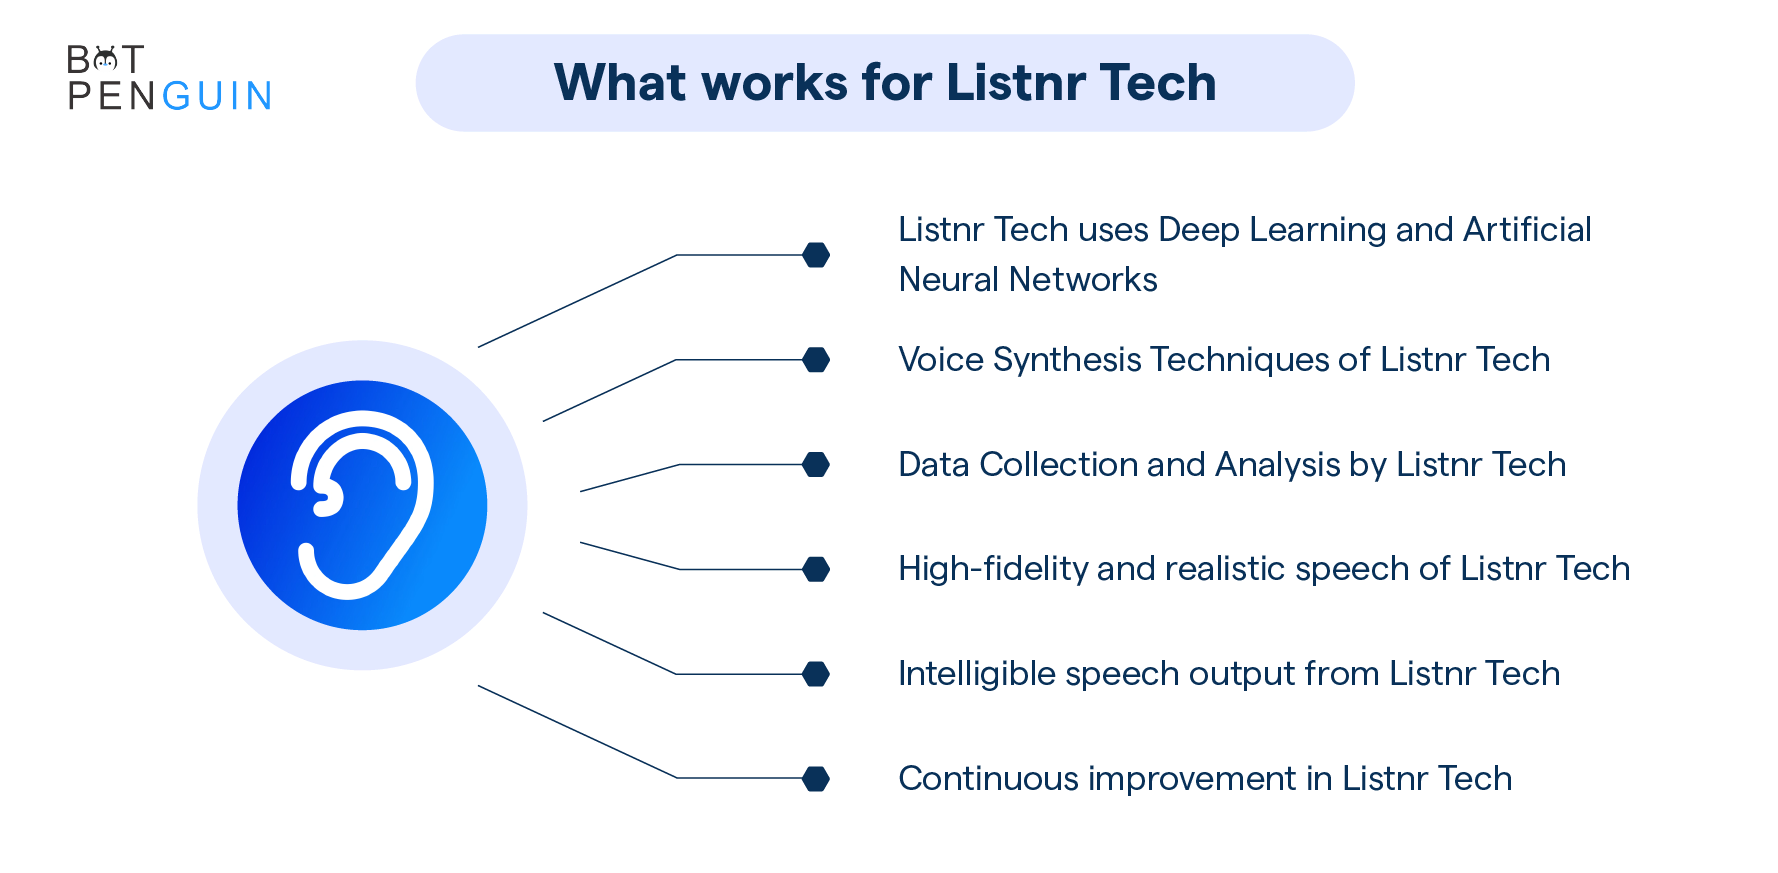 What works for Listnr Tech.